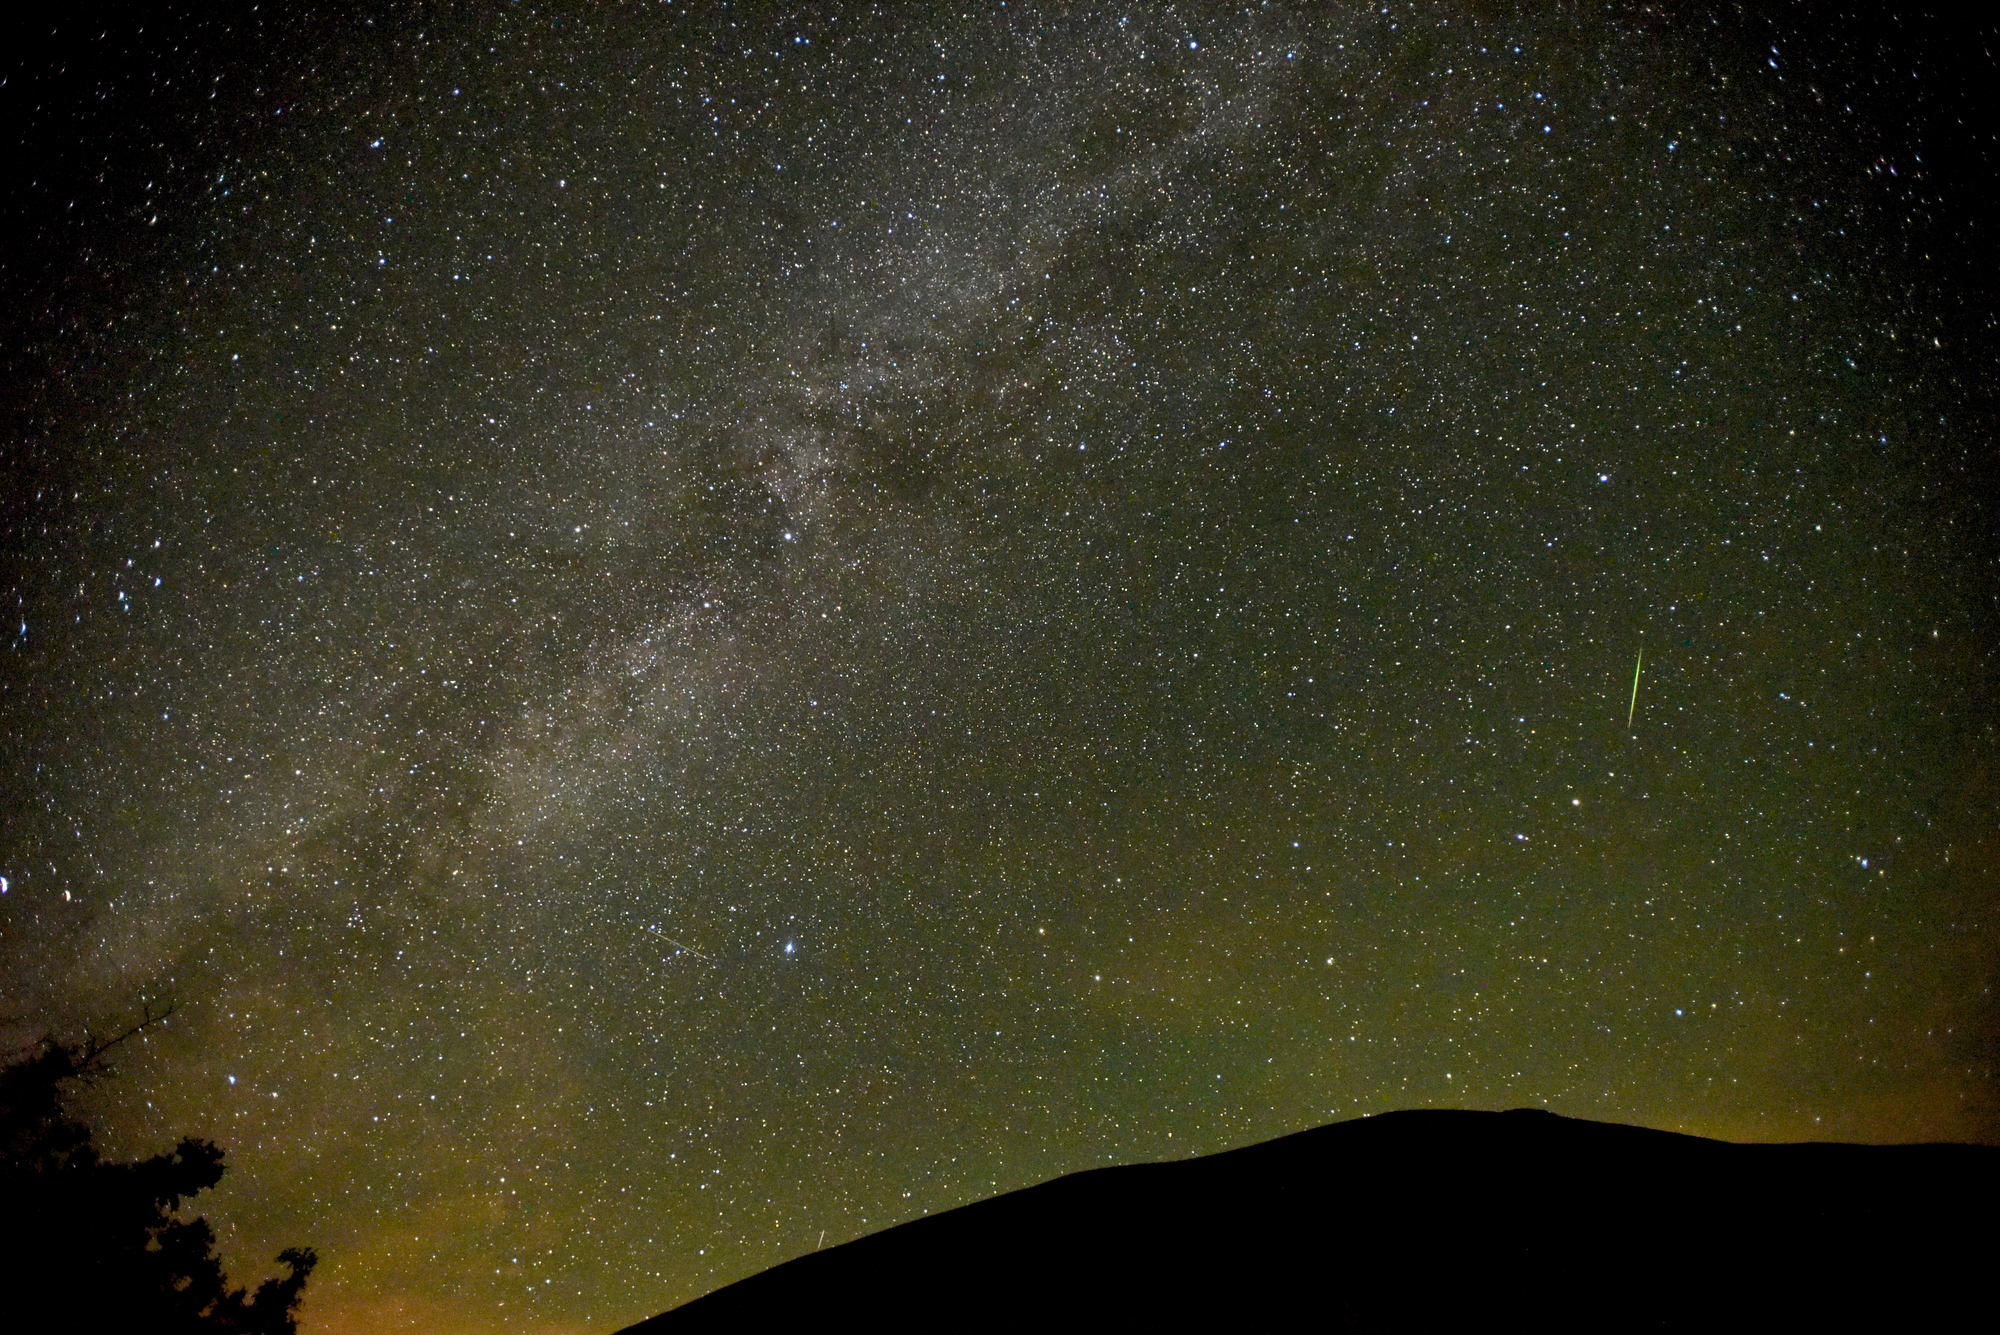 Summer’s most exciting meteor showers are underway right now, best dates to watch